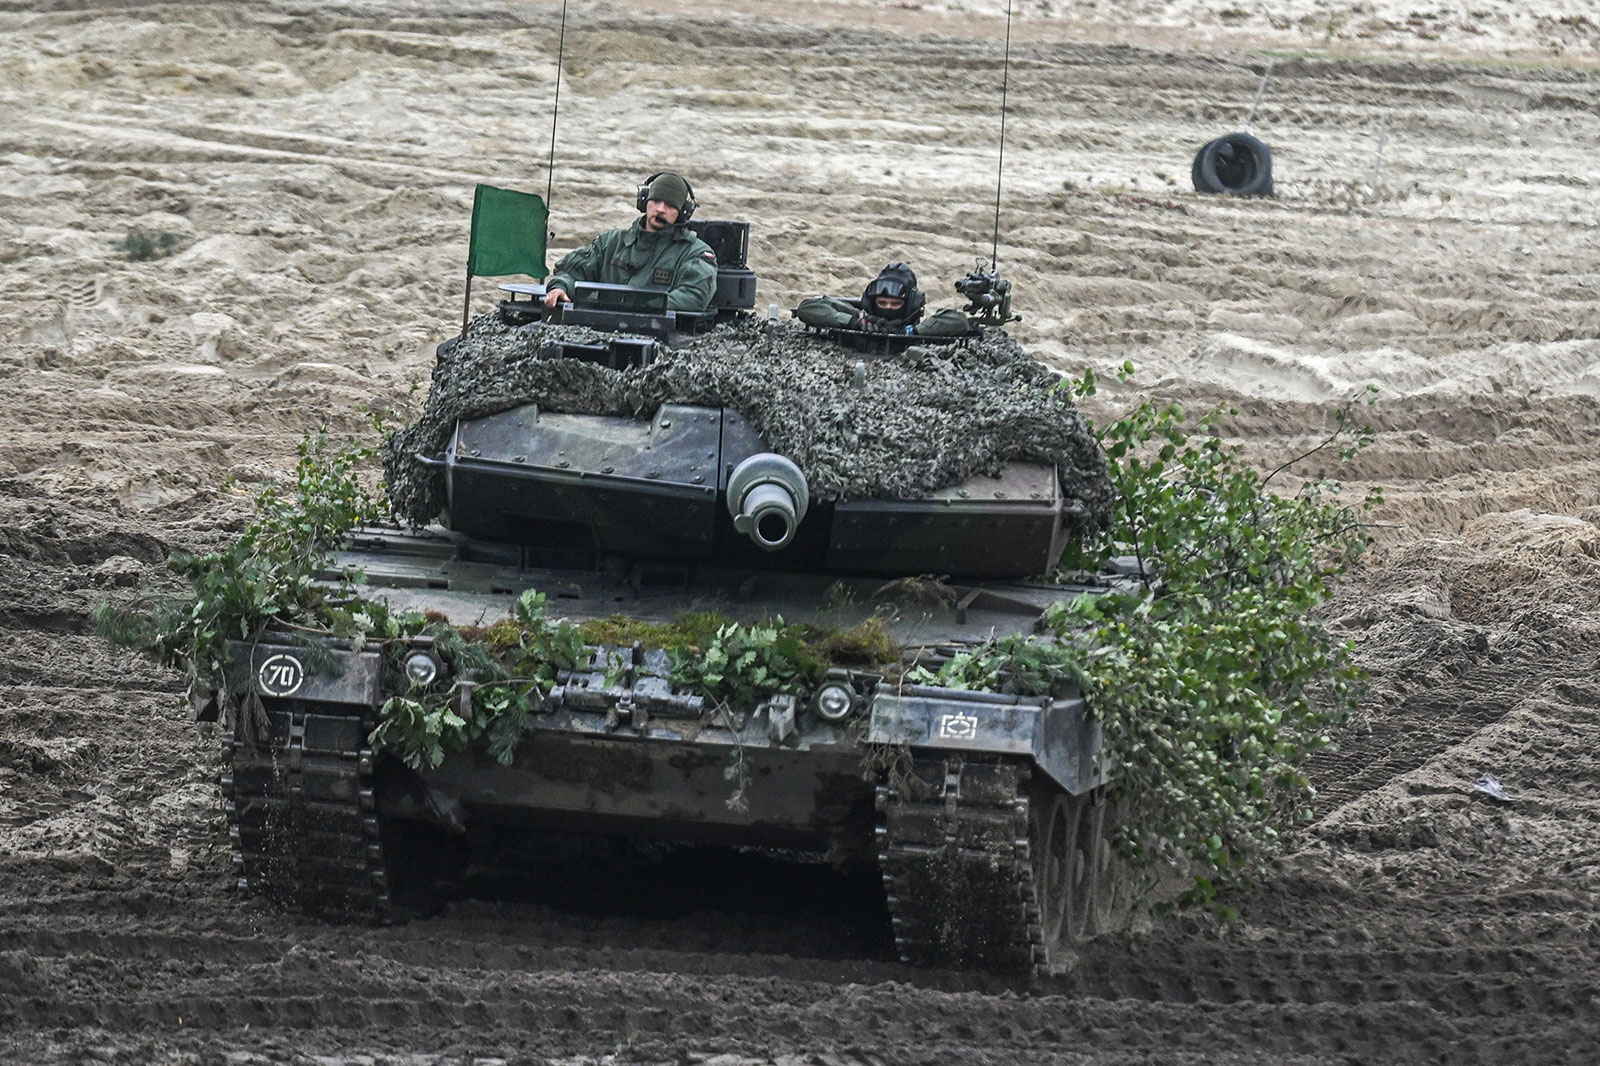 Polish military drive a Leopard tank during a live fire demonstration part of the Bear 22 military exercises at the Nowa Deba training ground in Poland last year. 